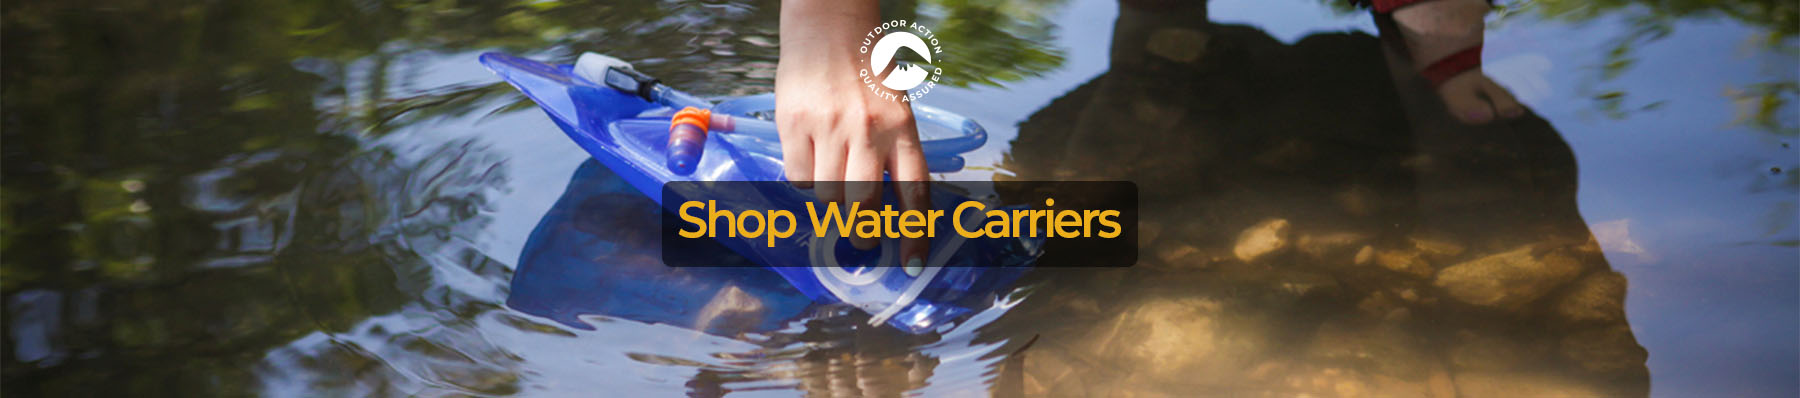 Shop Water Carriers online at Outdoor Action